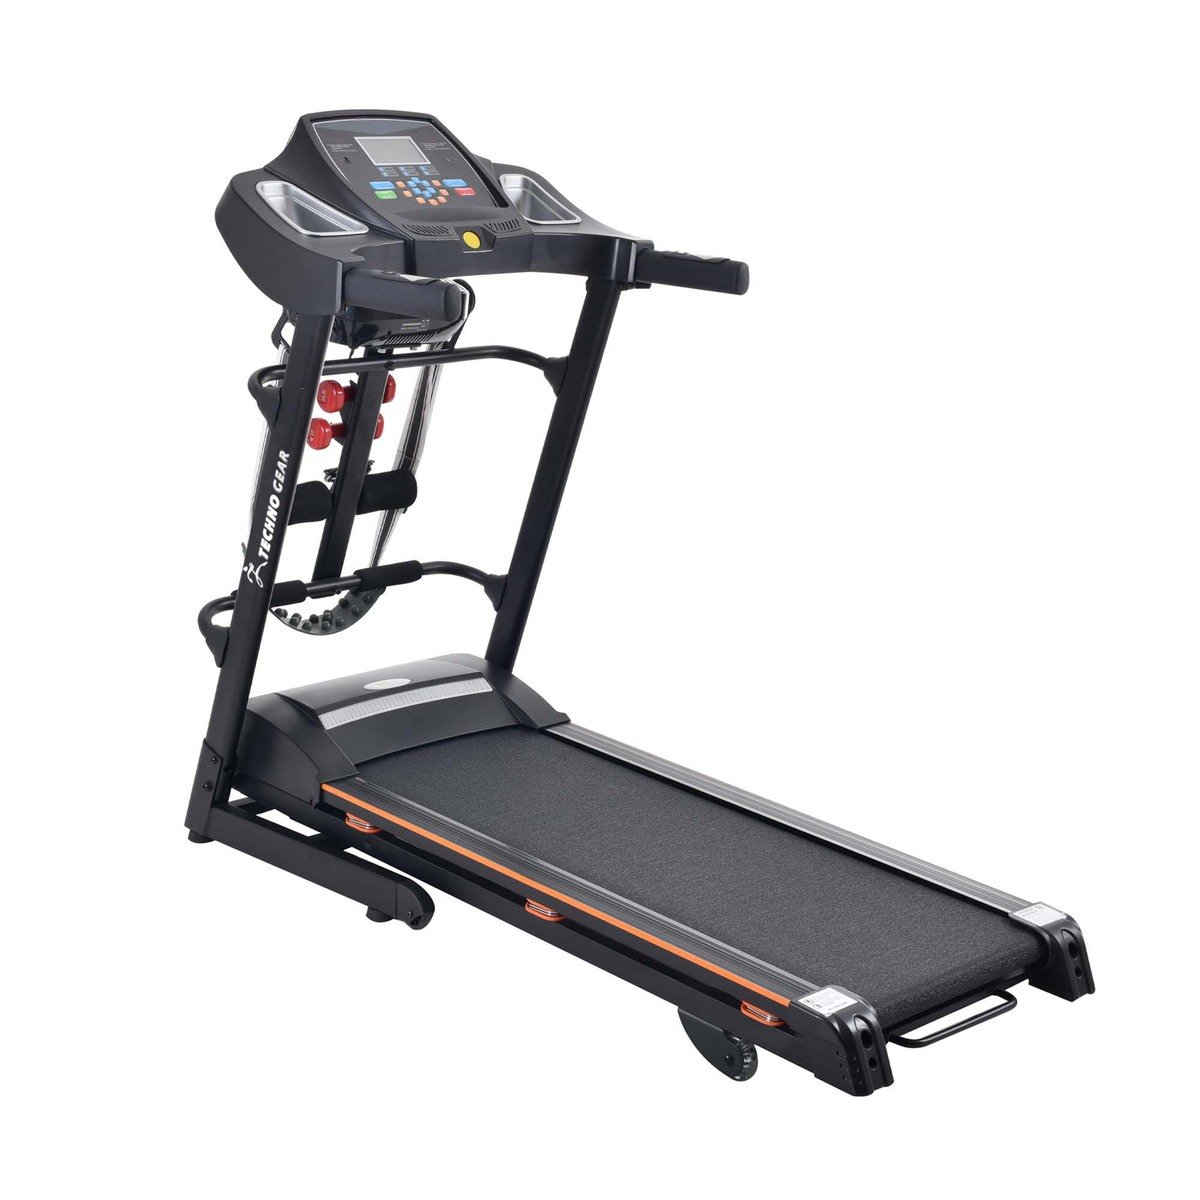 Techno Gear Treadmill with Massager TG818DS 1.75HP